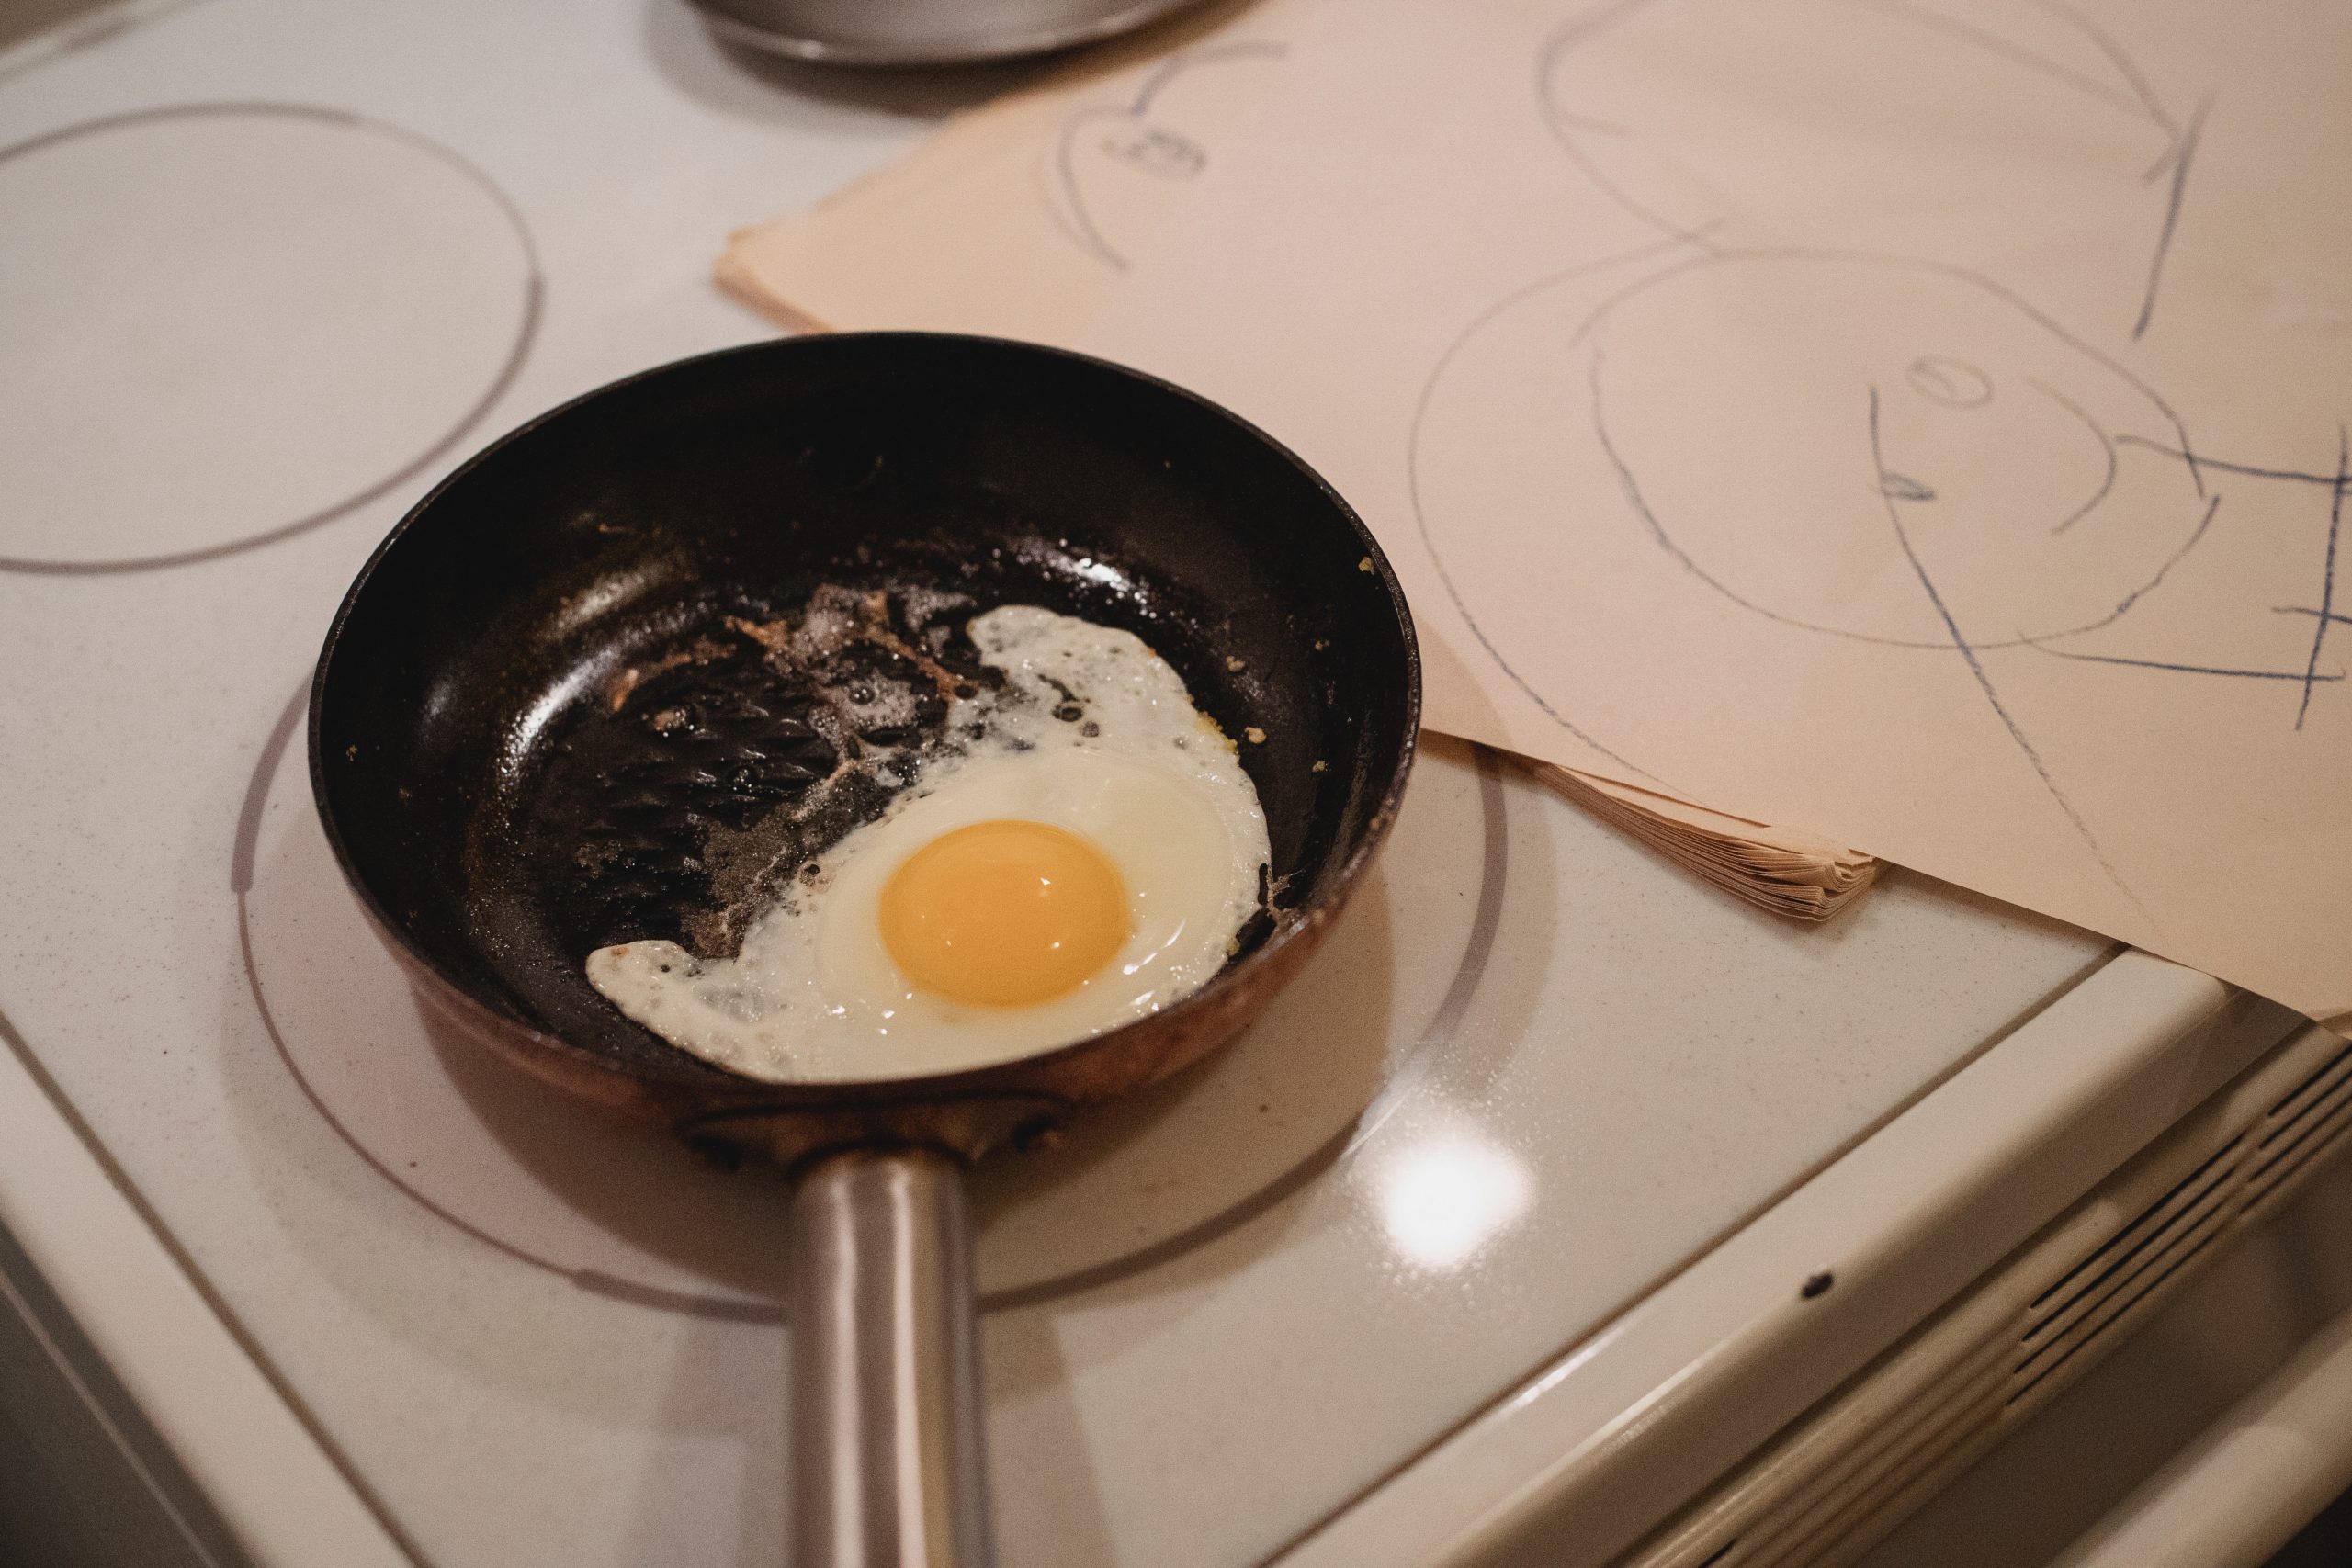 How to Make Fried Eggs?